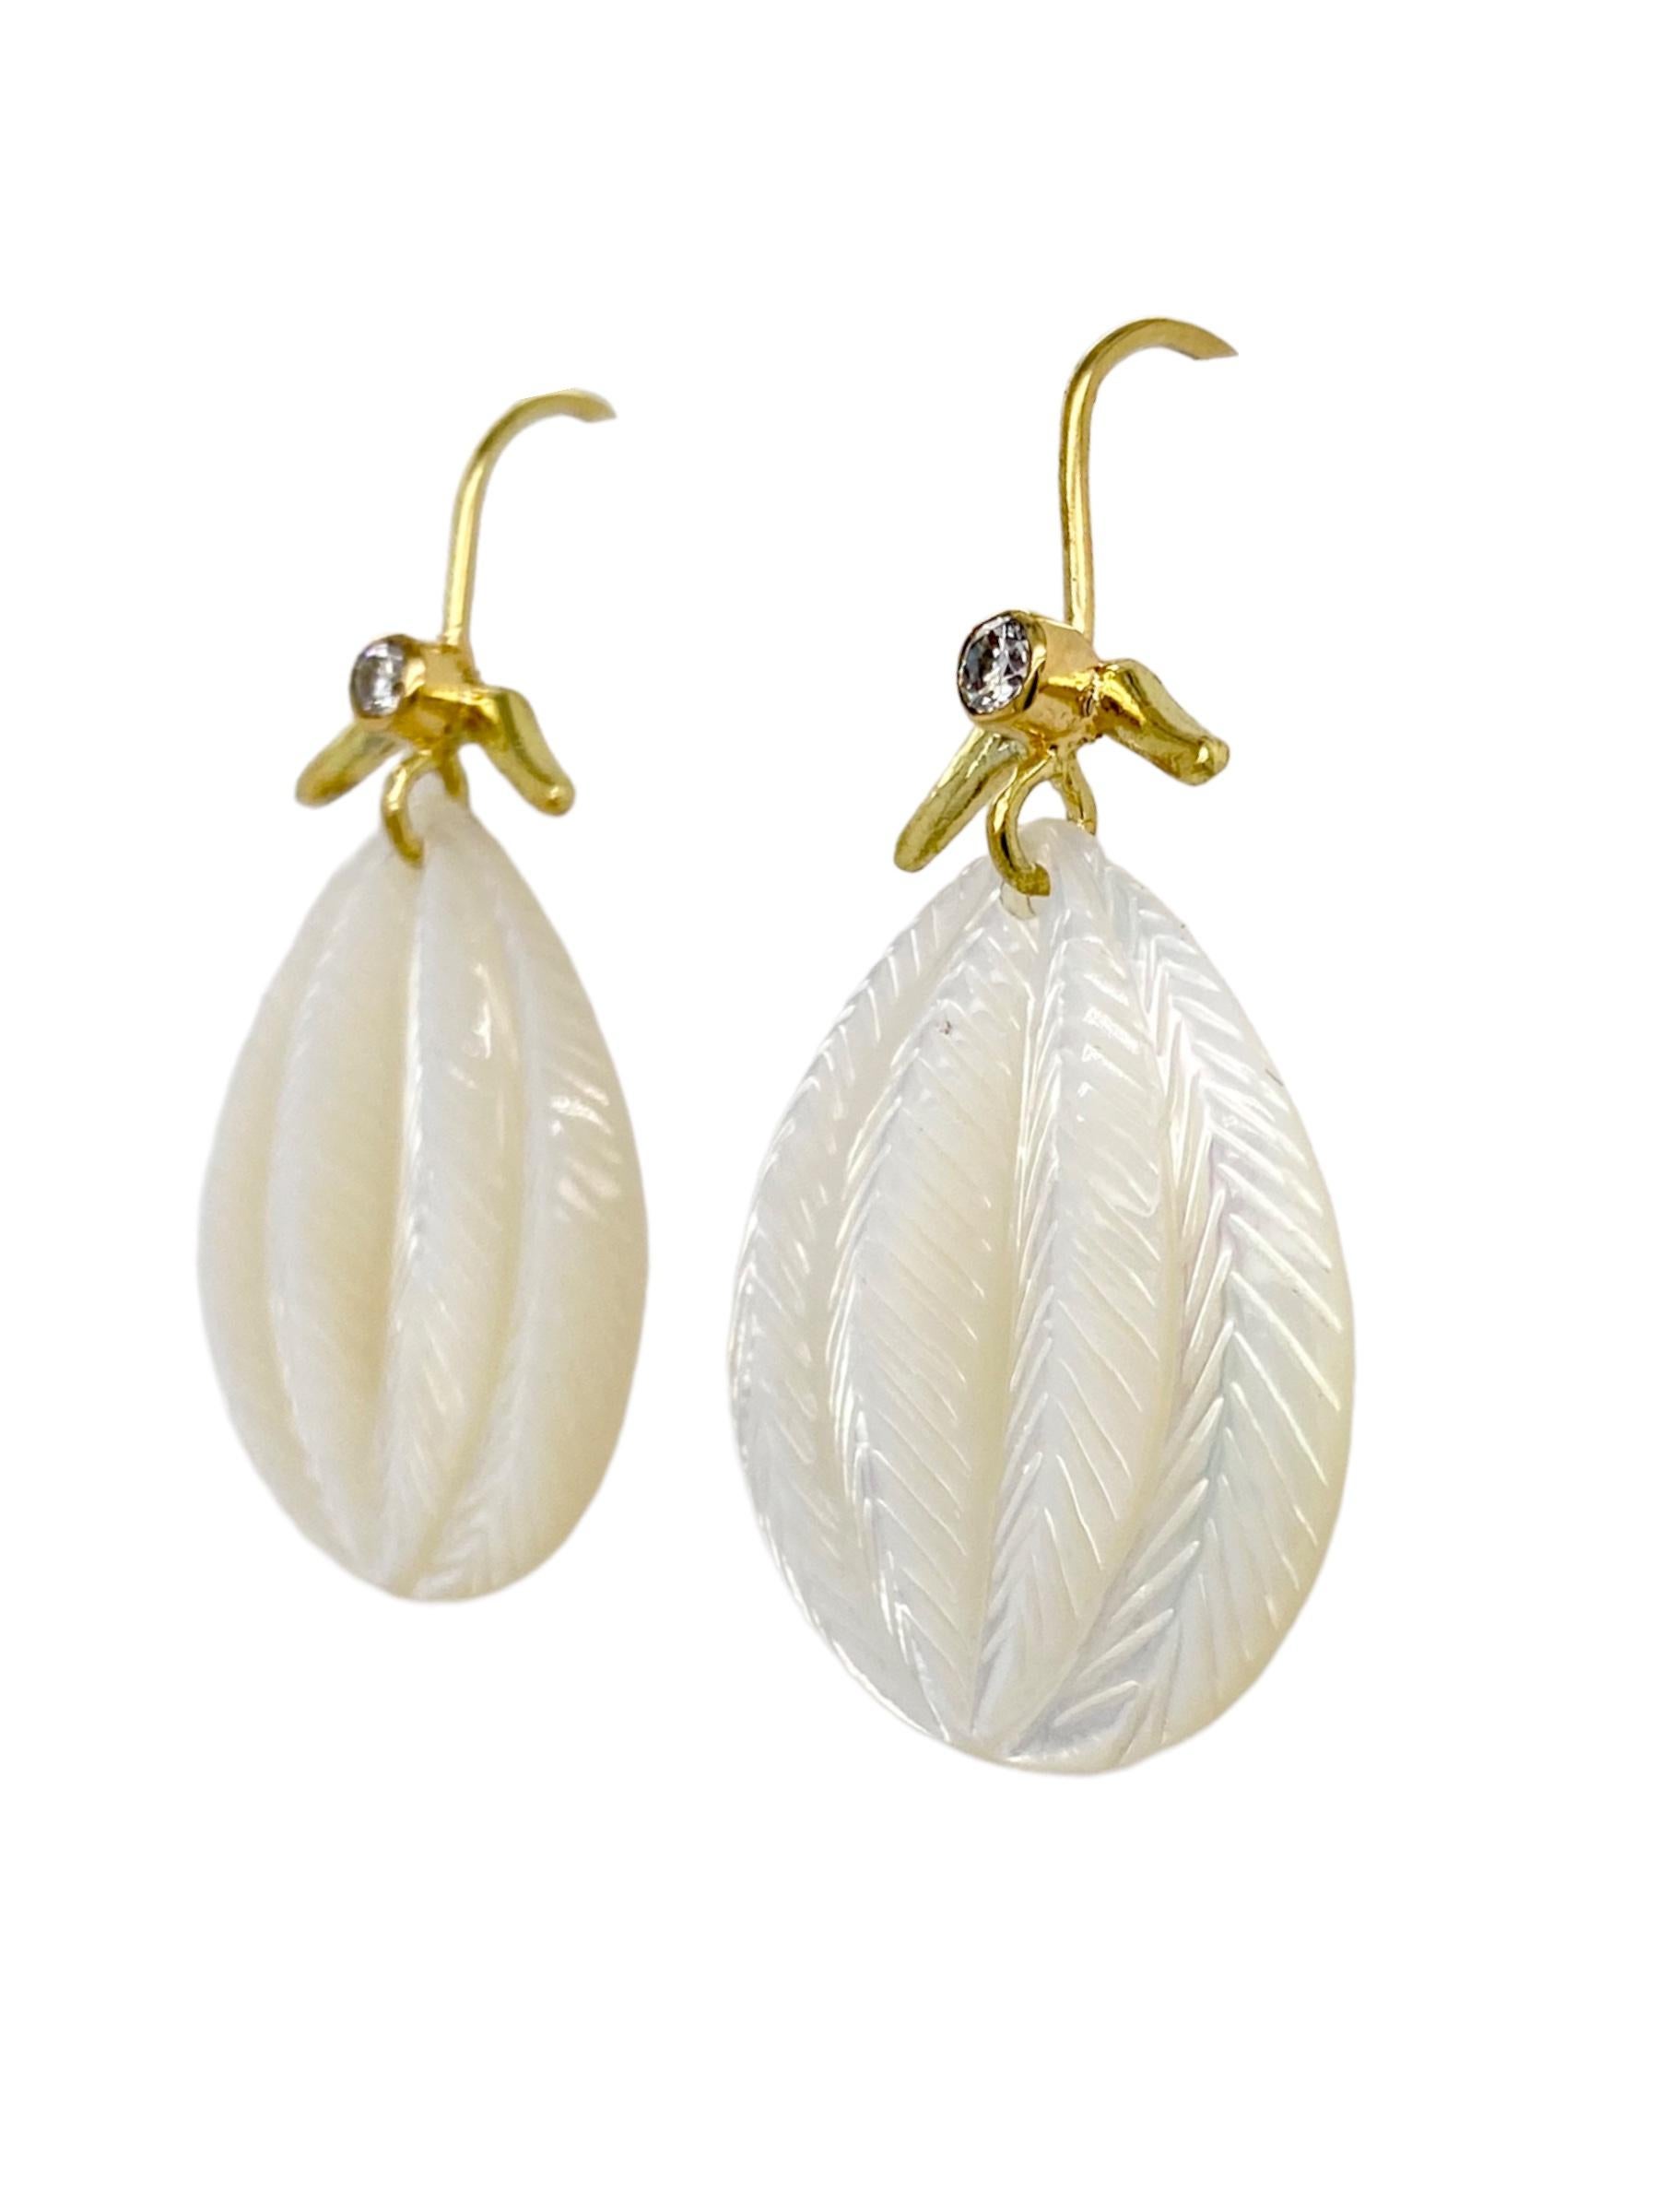 Hand-carved Mother of Pearl earrings with 18k yellow gold and two .10ct diamonds.
Inspired by my recent sailing travels.
“The purpose of jewelry is not just for adornment. There’s information in it and it changes you when you put it on.”
My jewelry